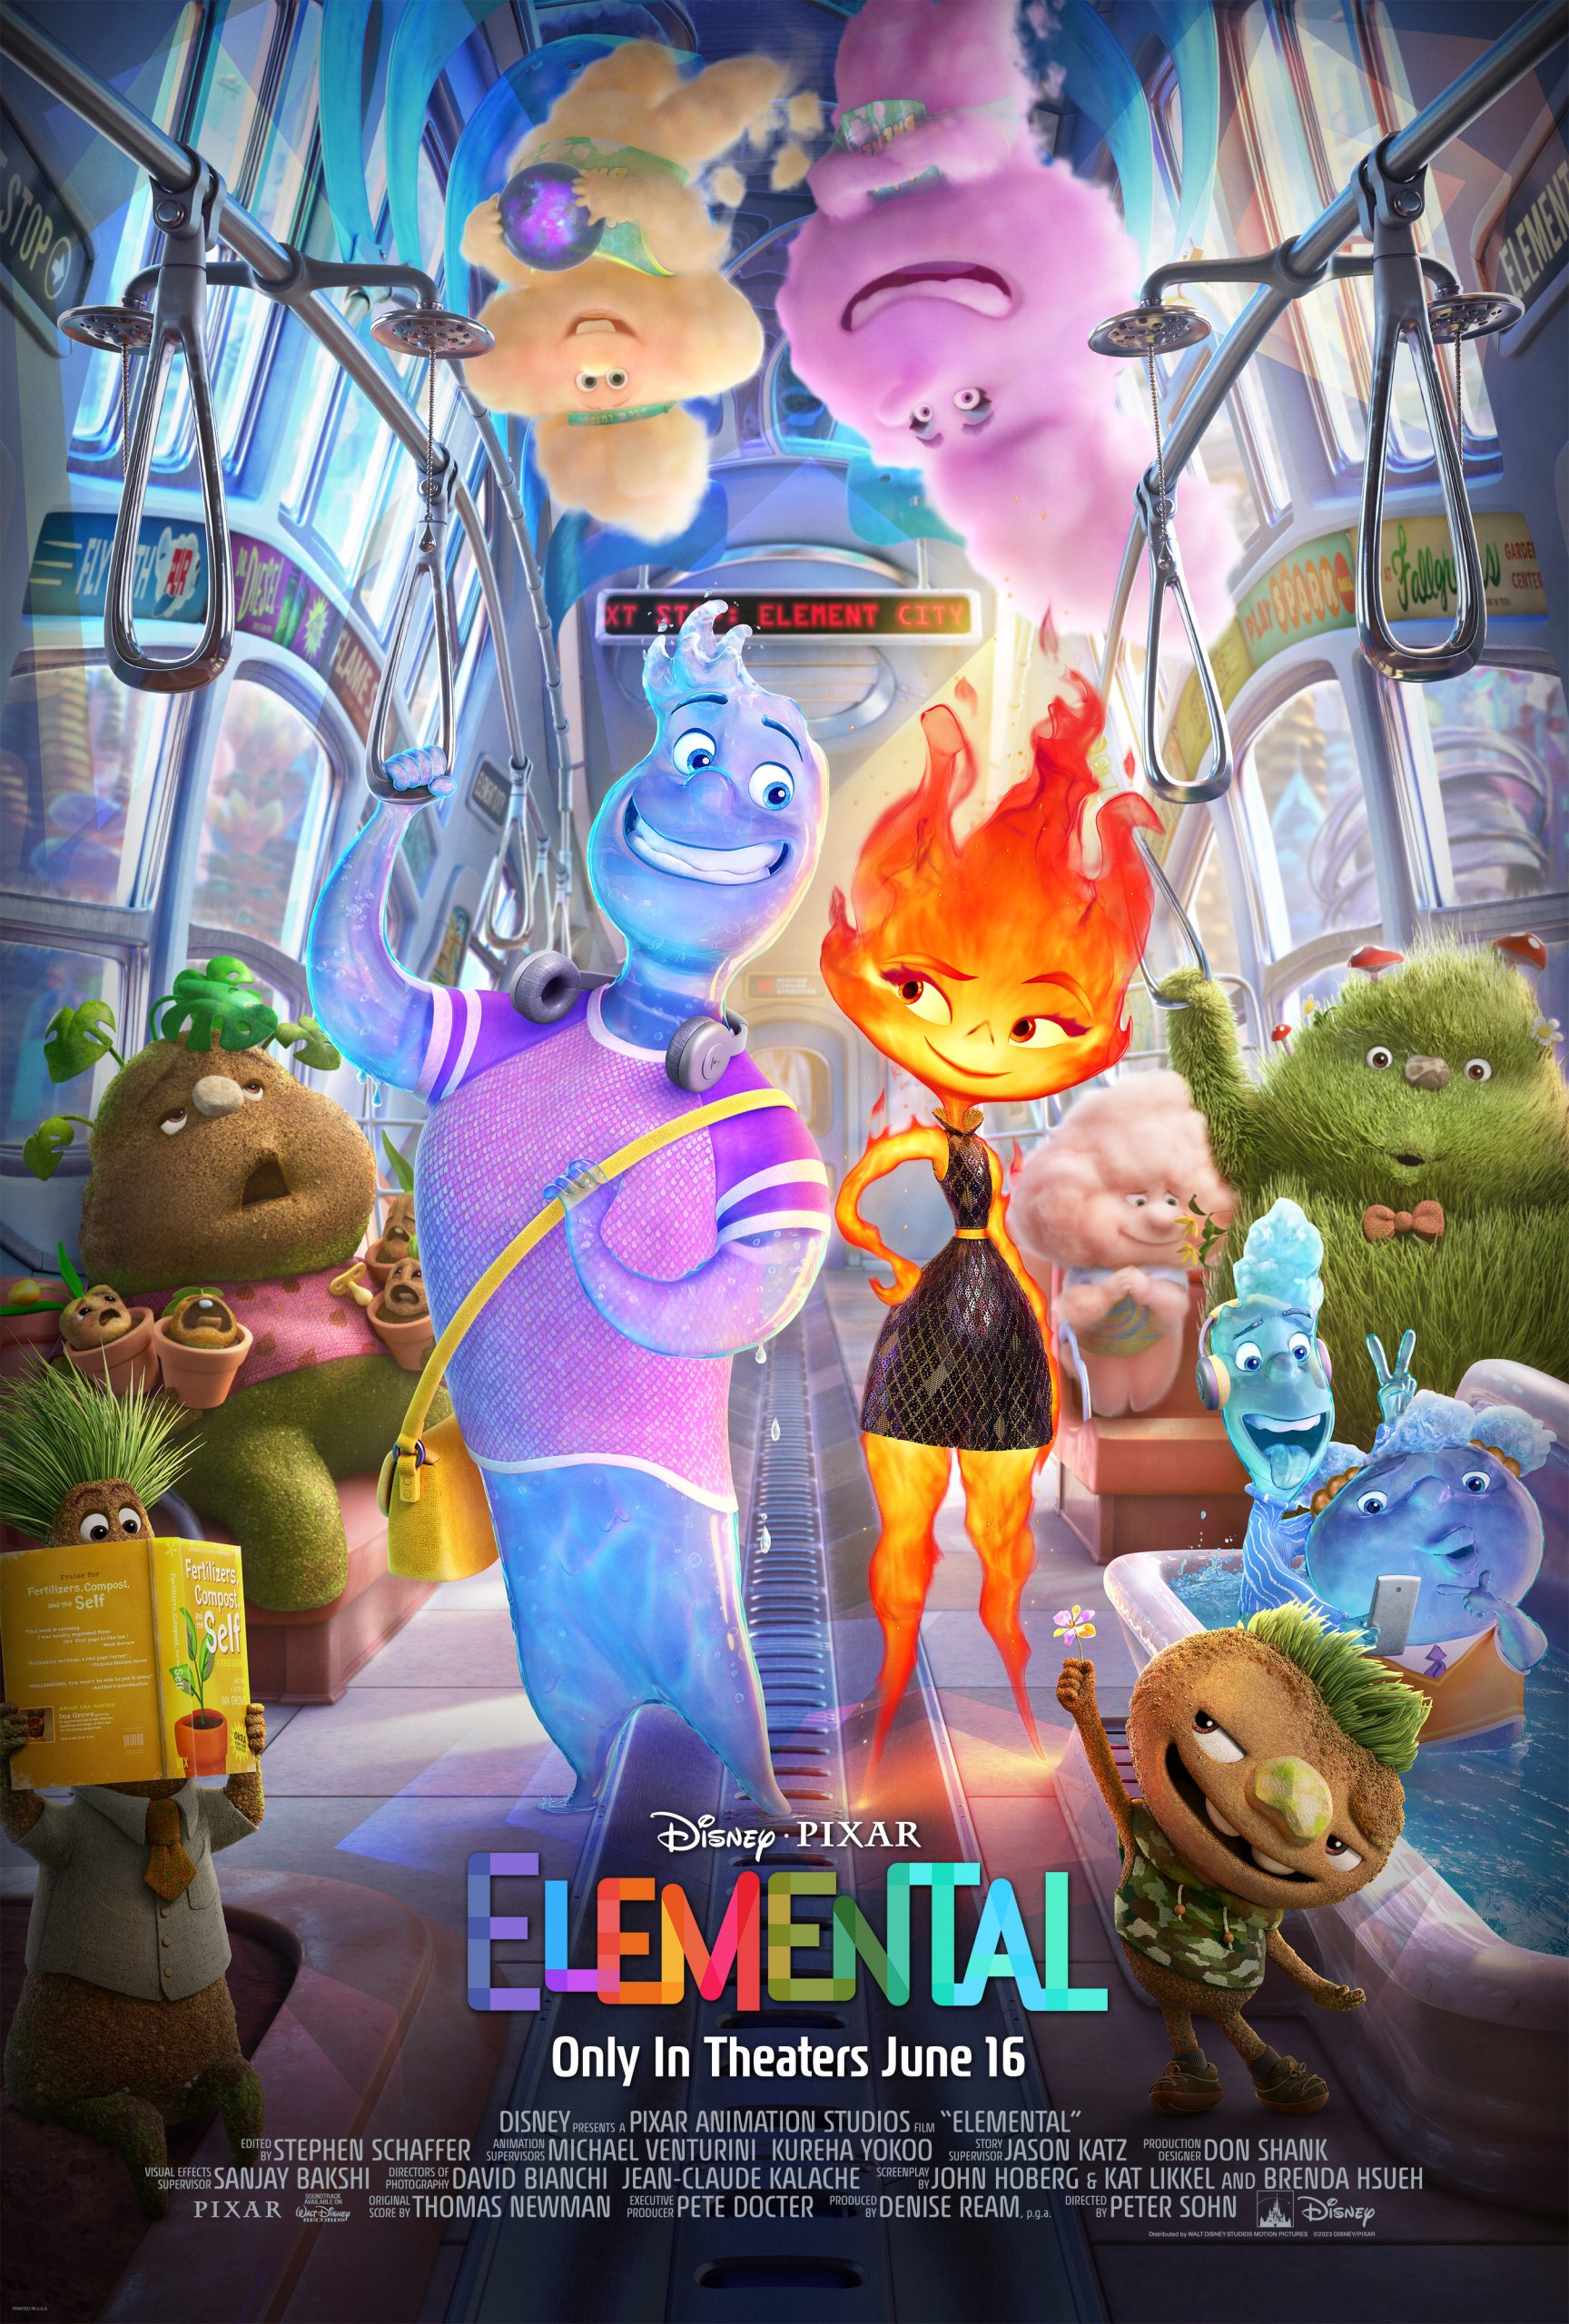 Free printable coloring and activity pages for Disney/Pixar's Elemental movie.